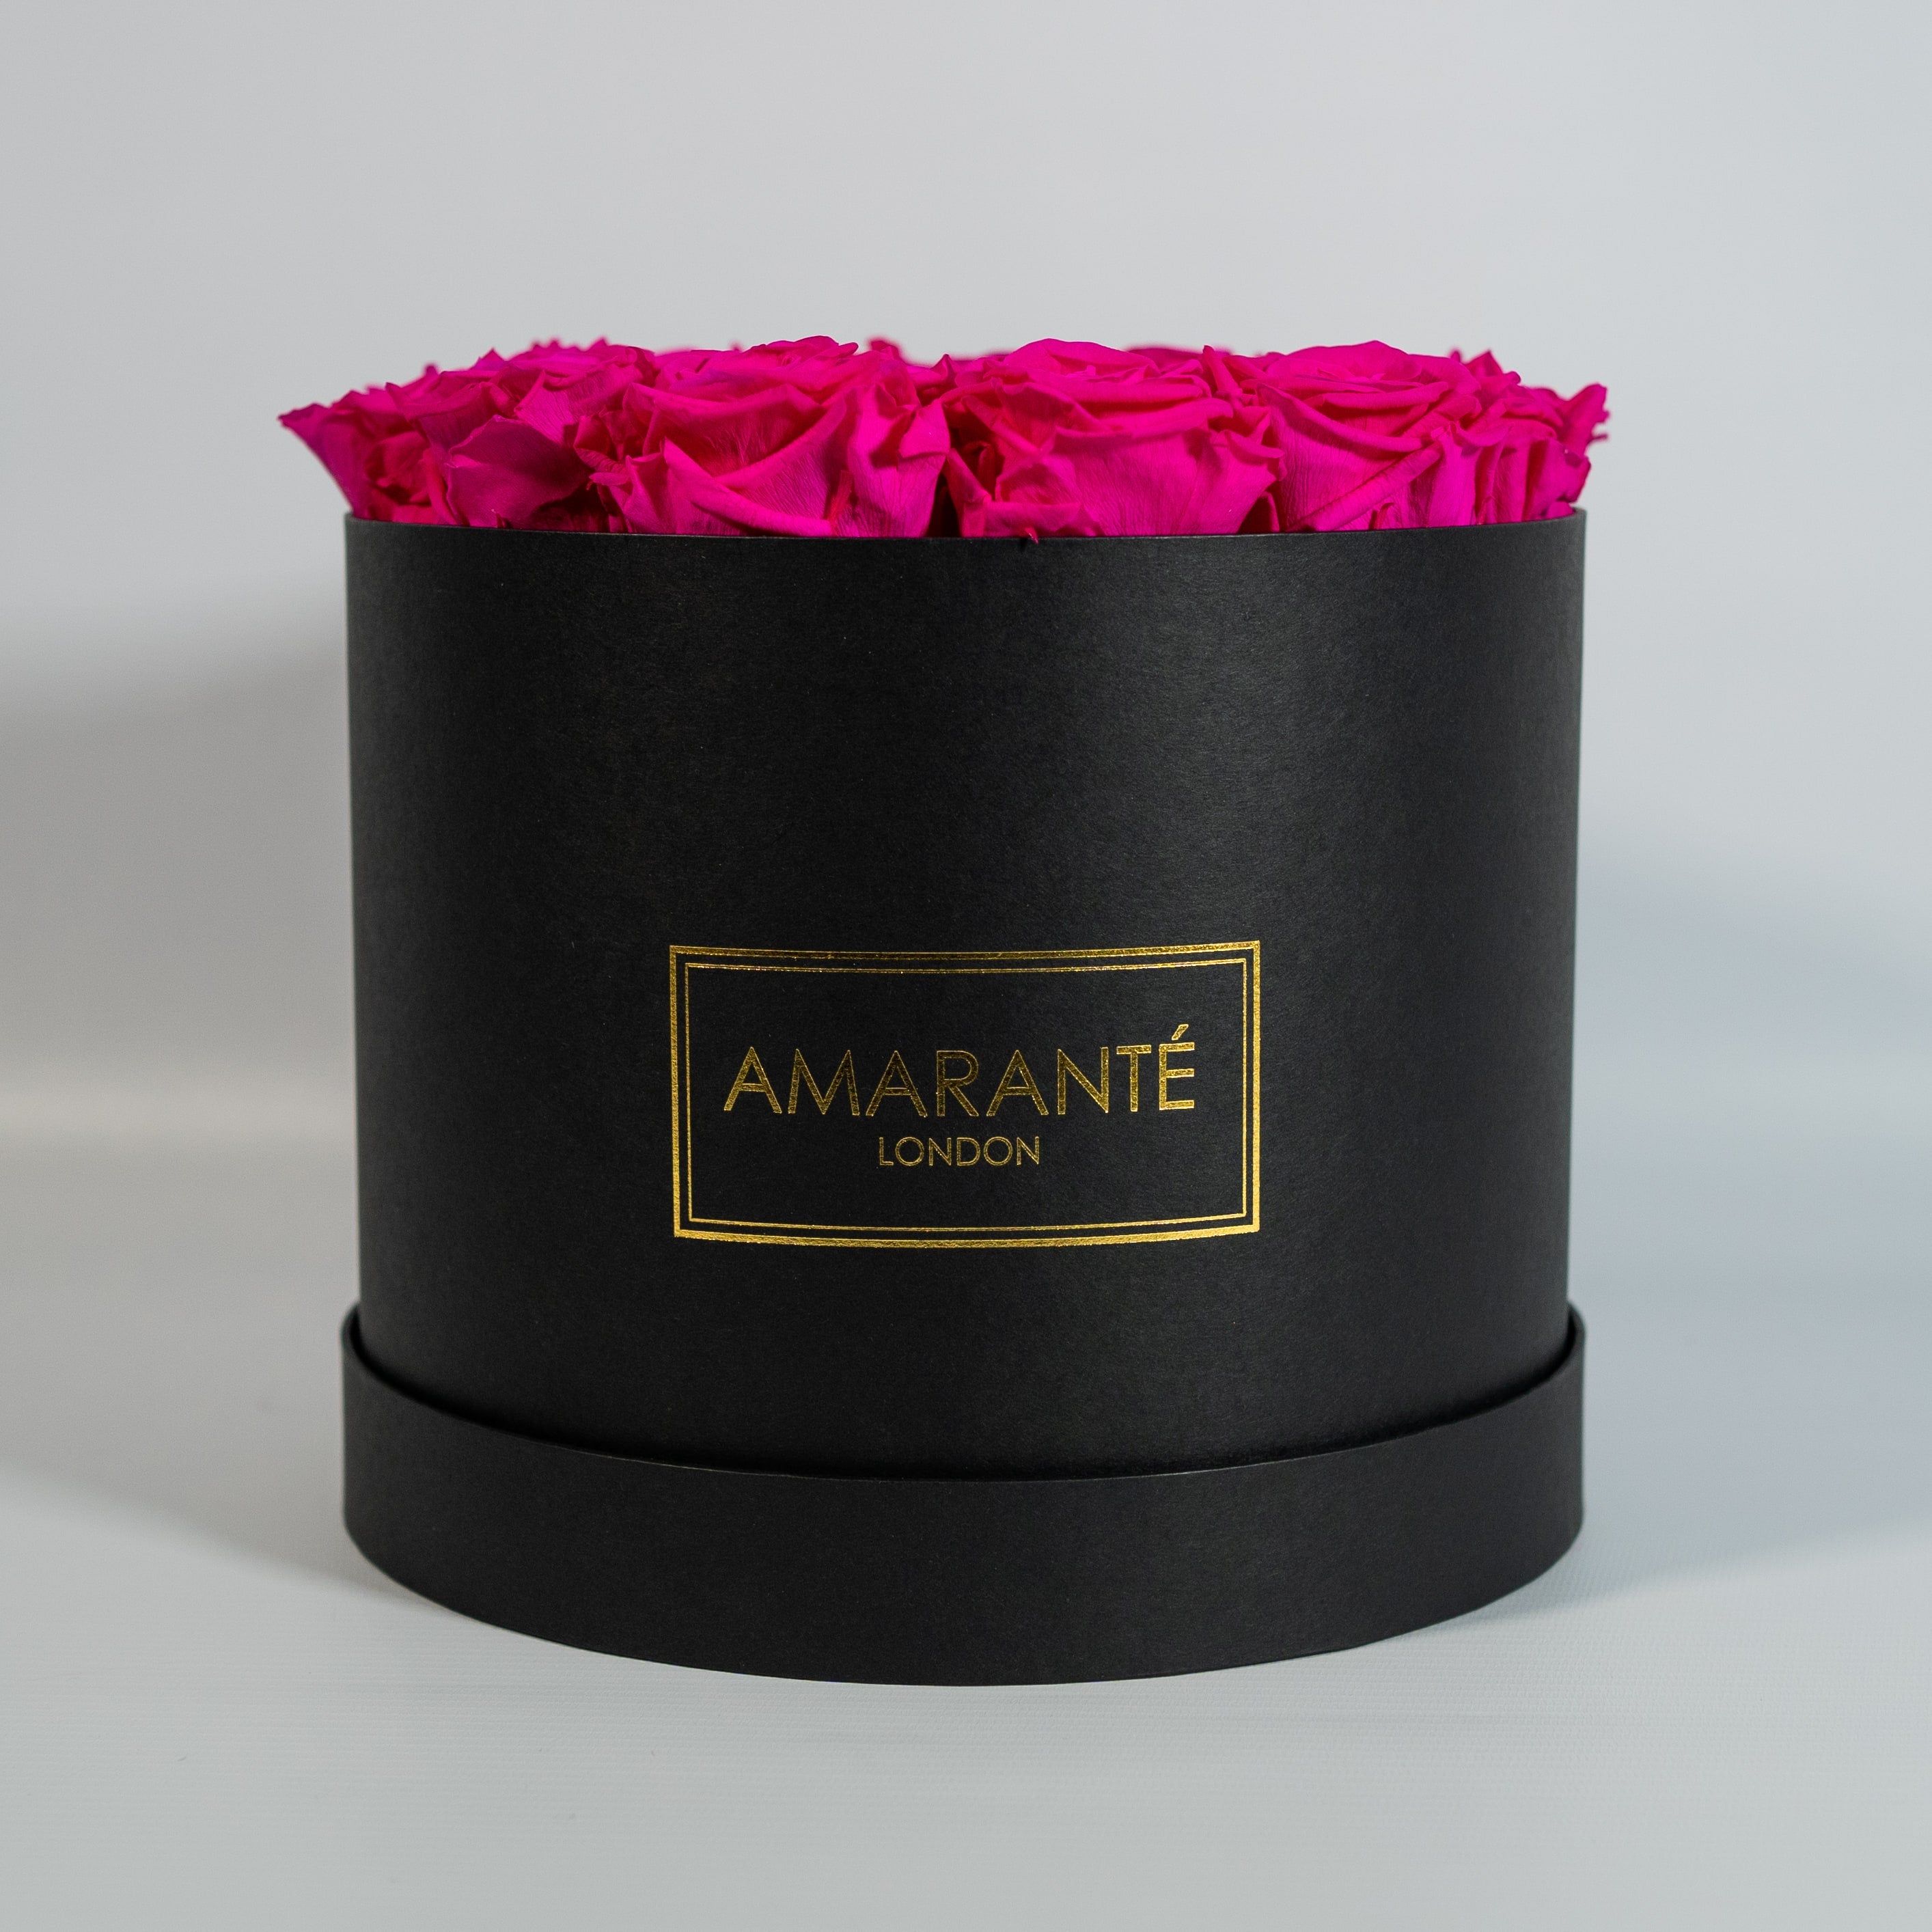 Extravagant hot pink Roses encomapssed in a fashionable black box 